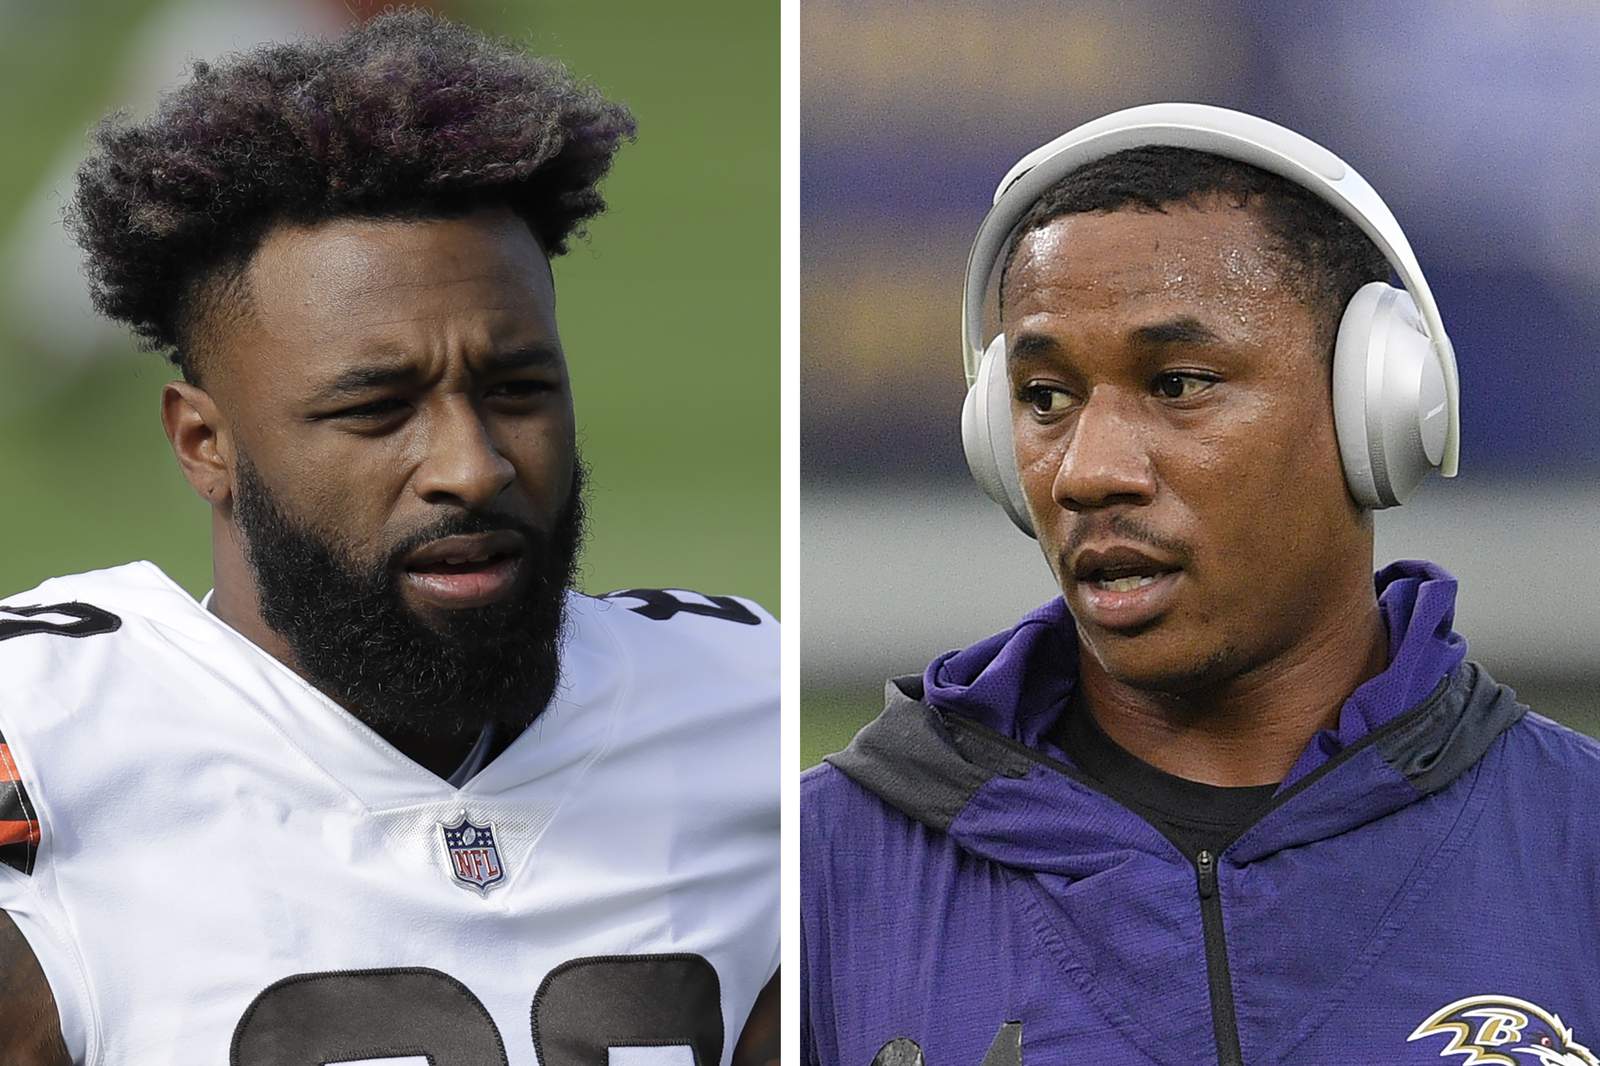 Browns' Landry calls Ravens CB Peters 'coward' for spitting